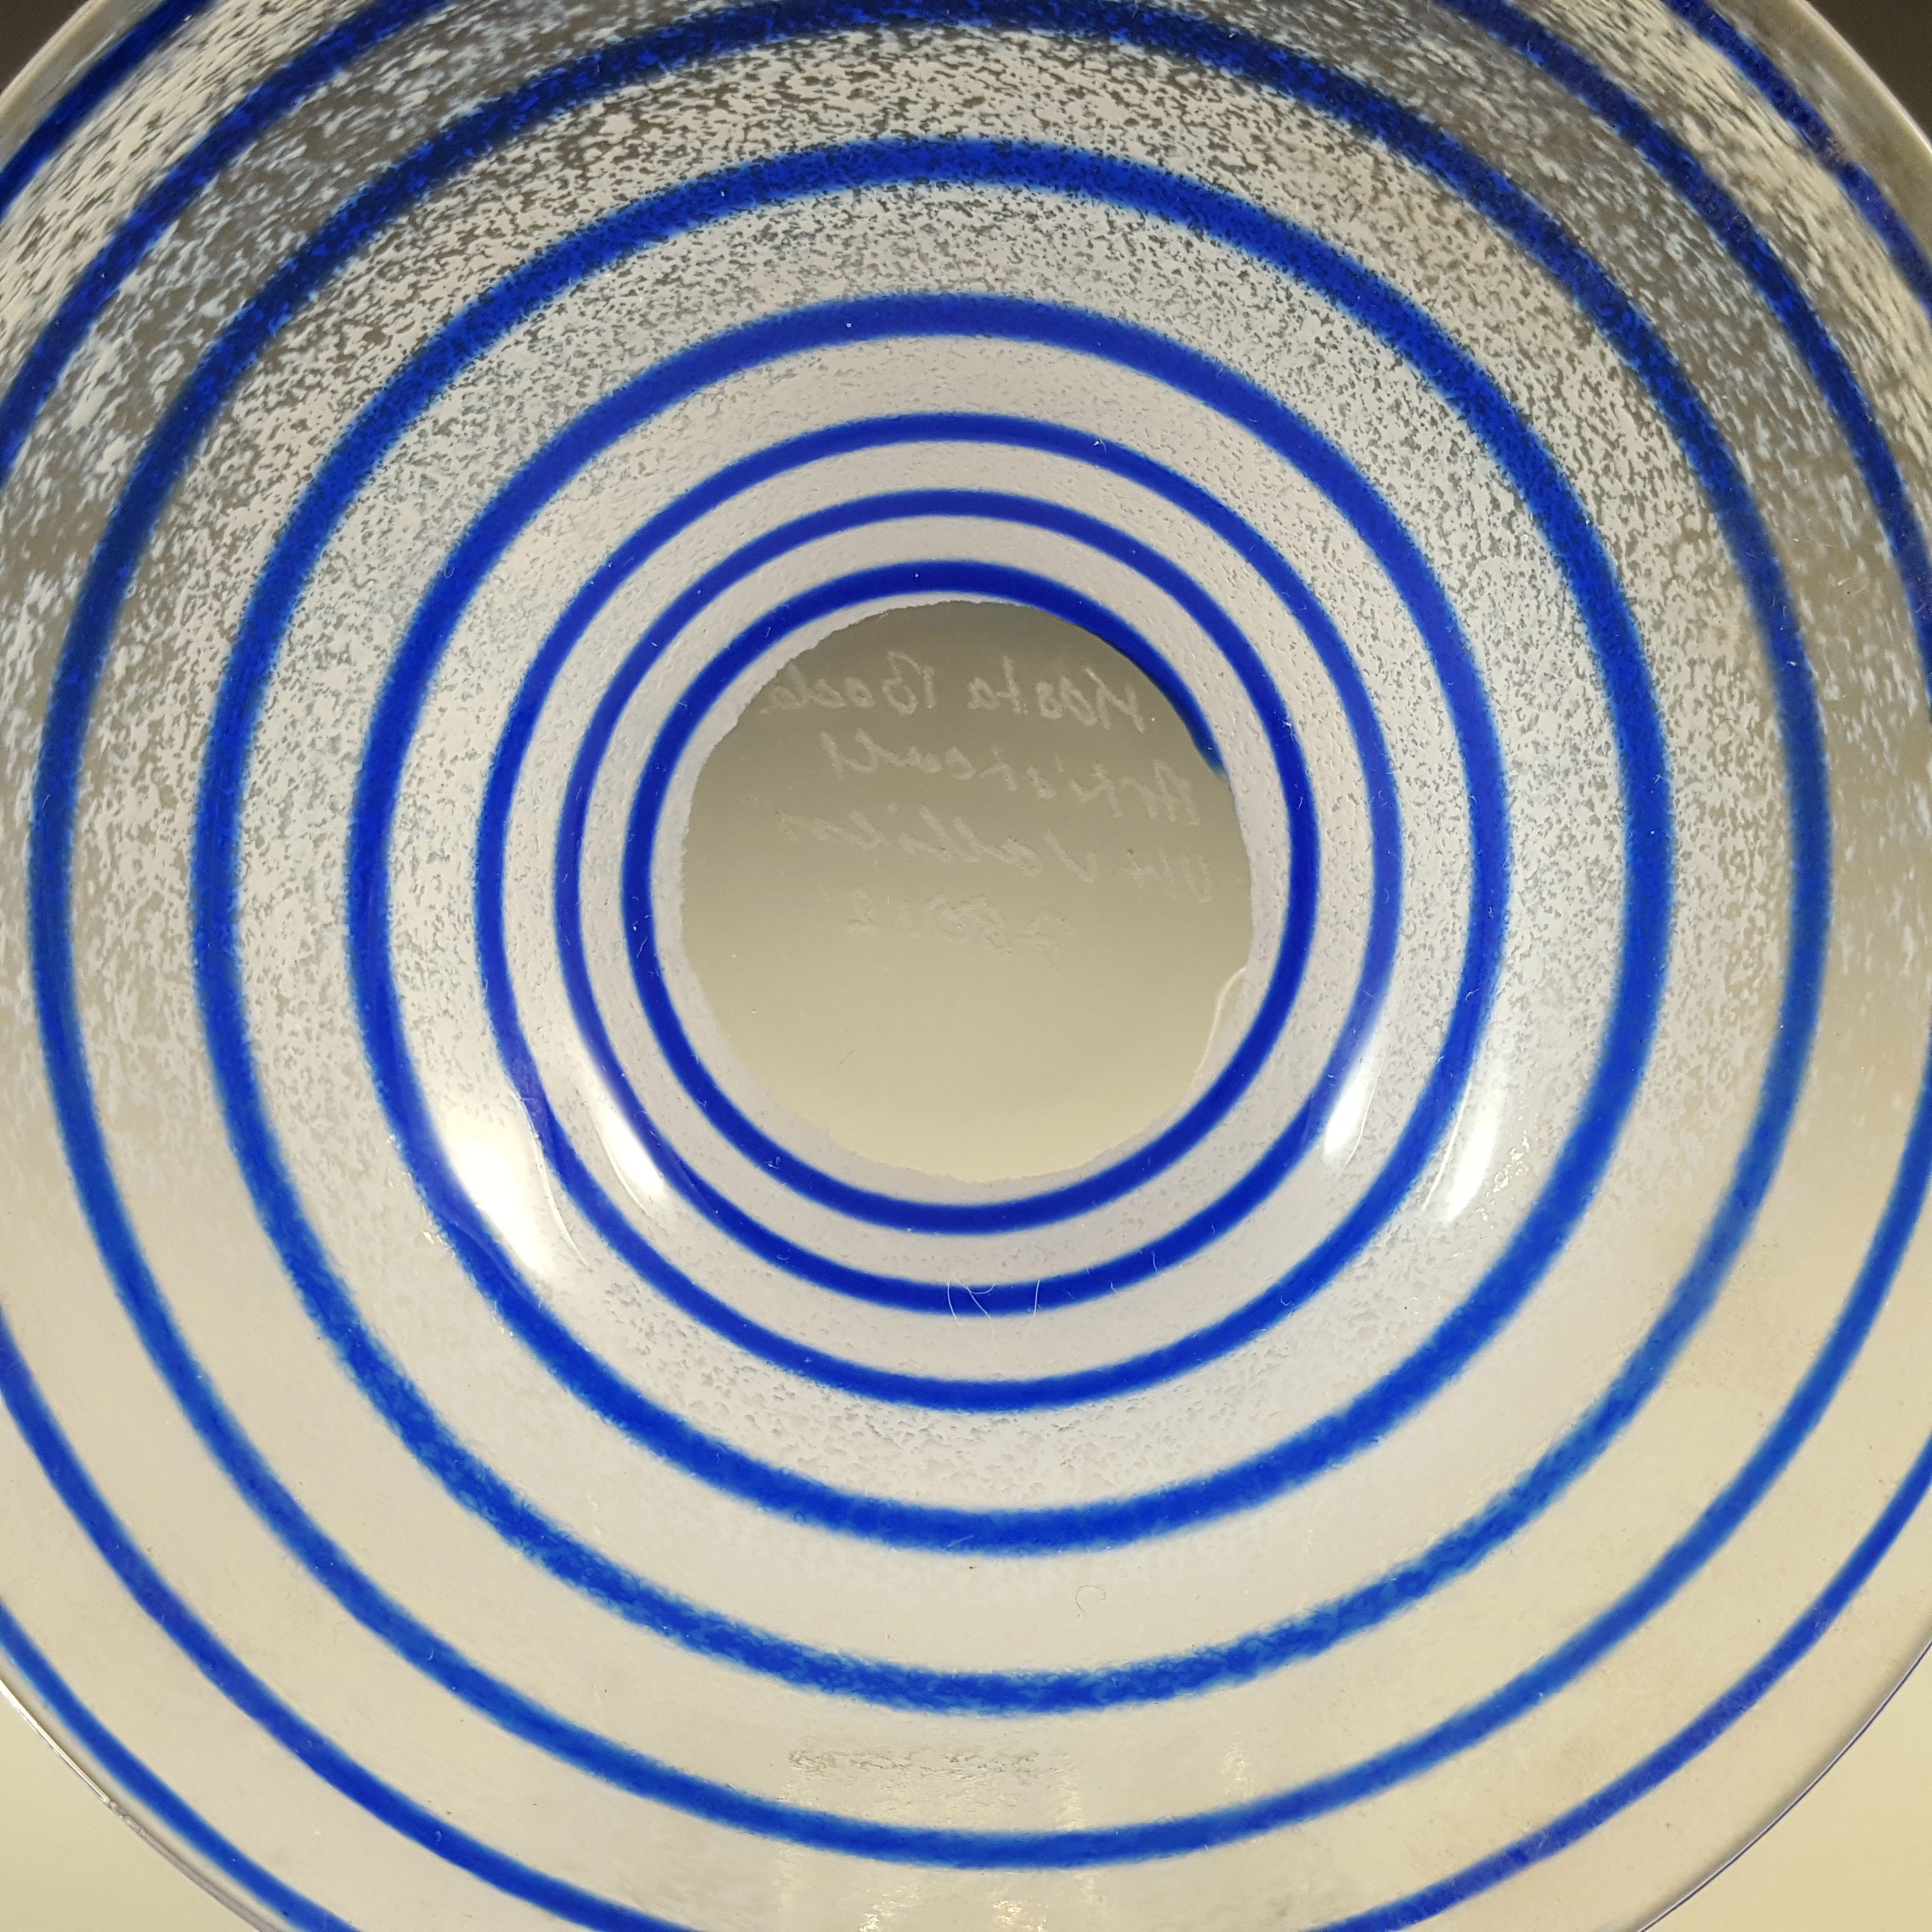 SIGNED Kosta Boda Glass Plate by Ulrica Vallien #78012 - Click Image to Close